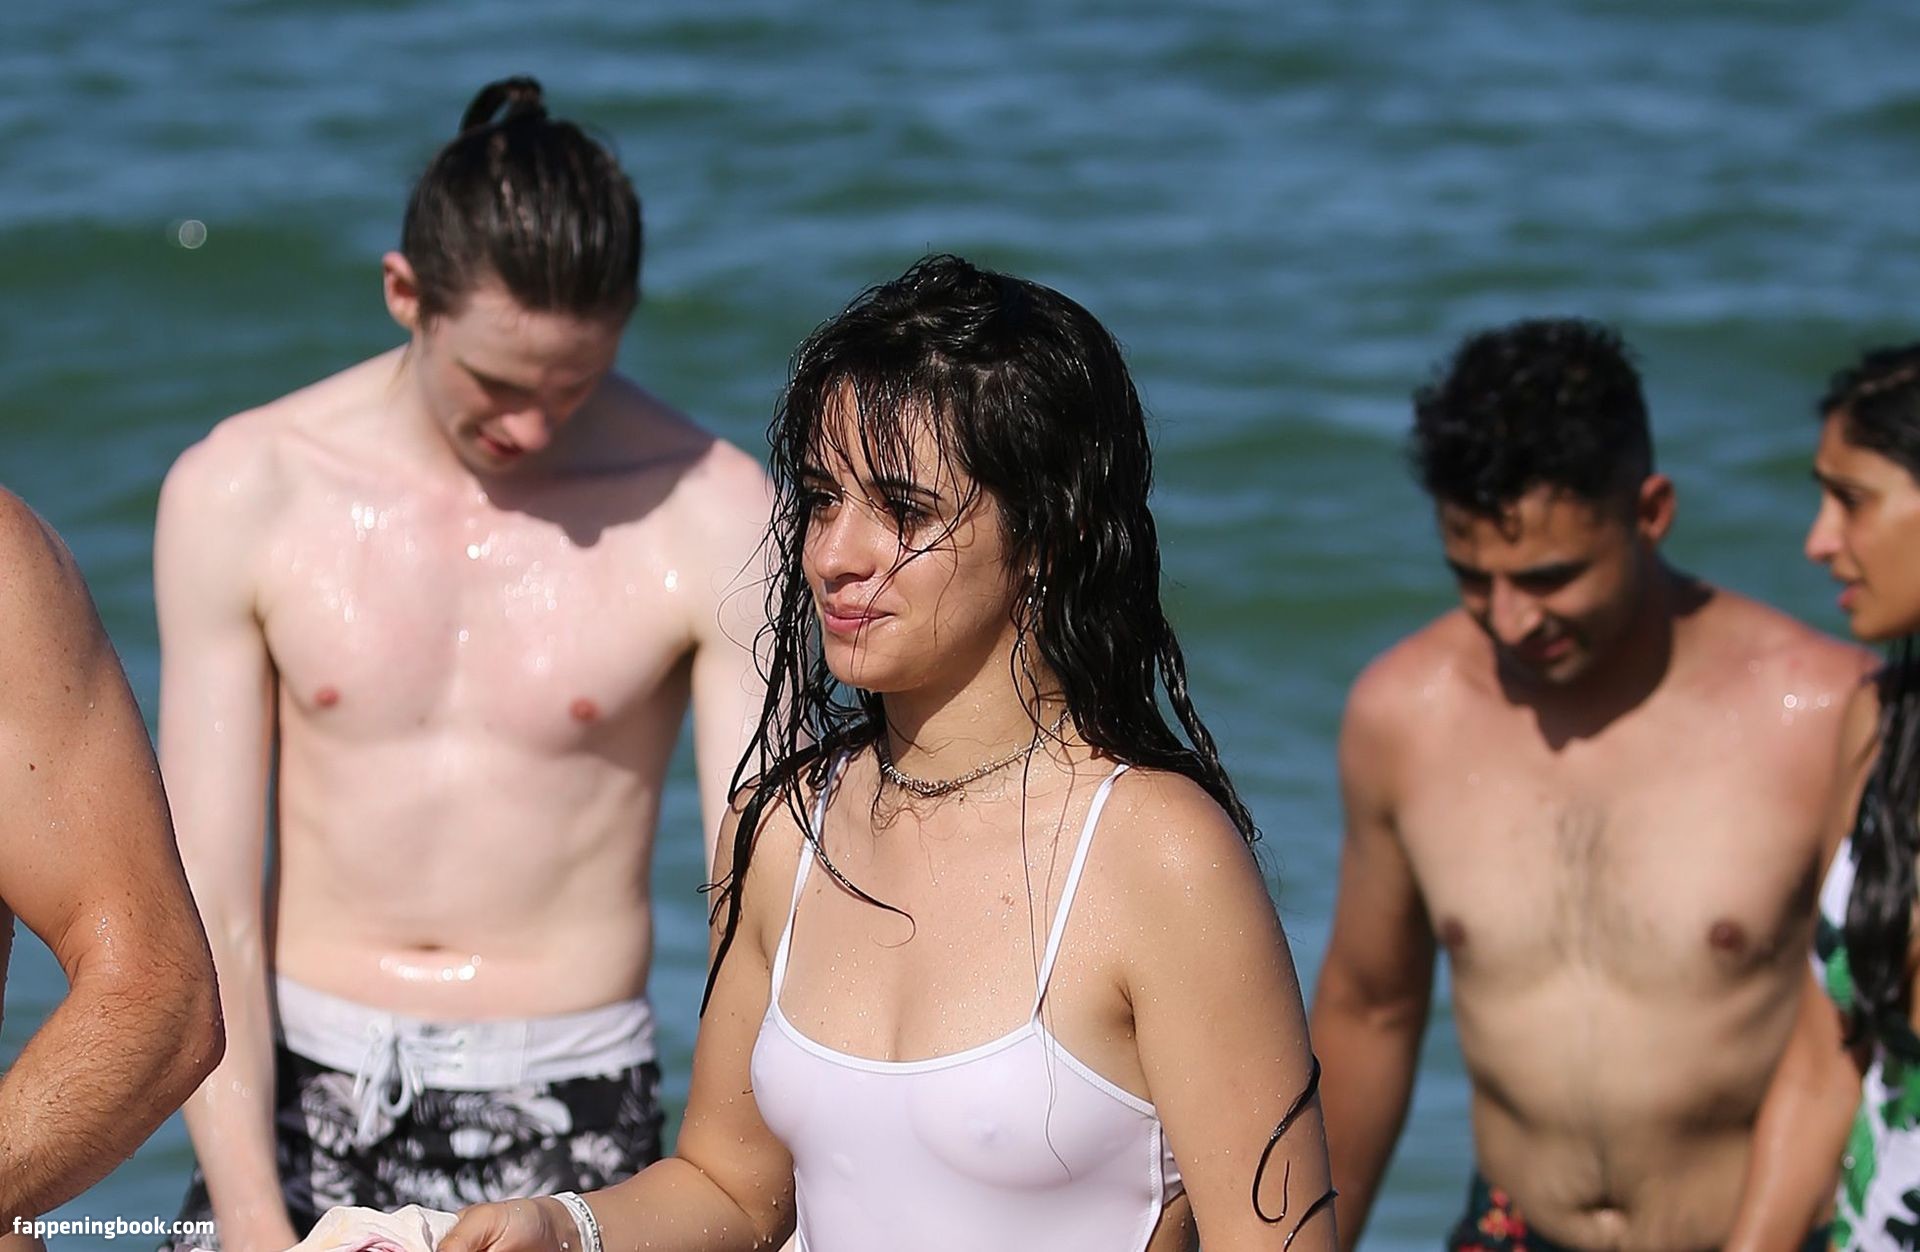 Camila cabello naked images